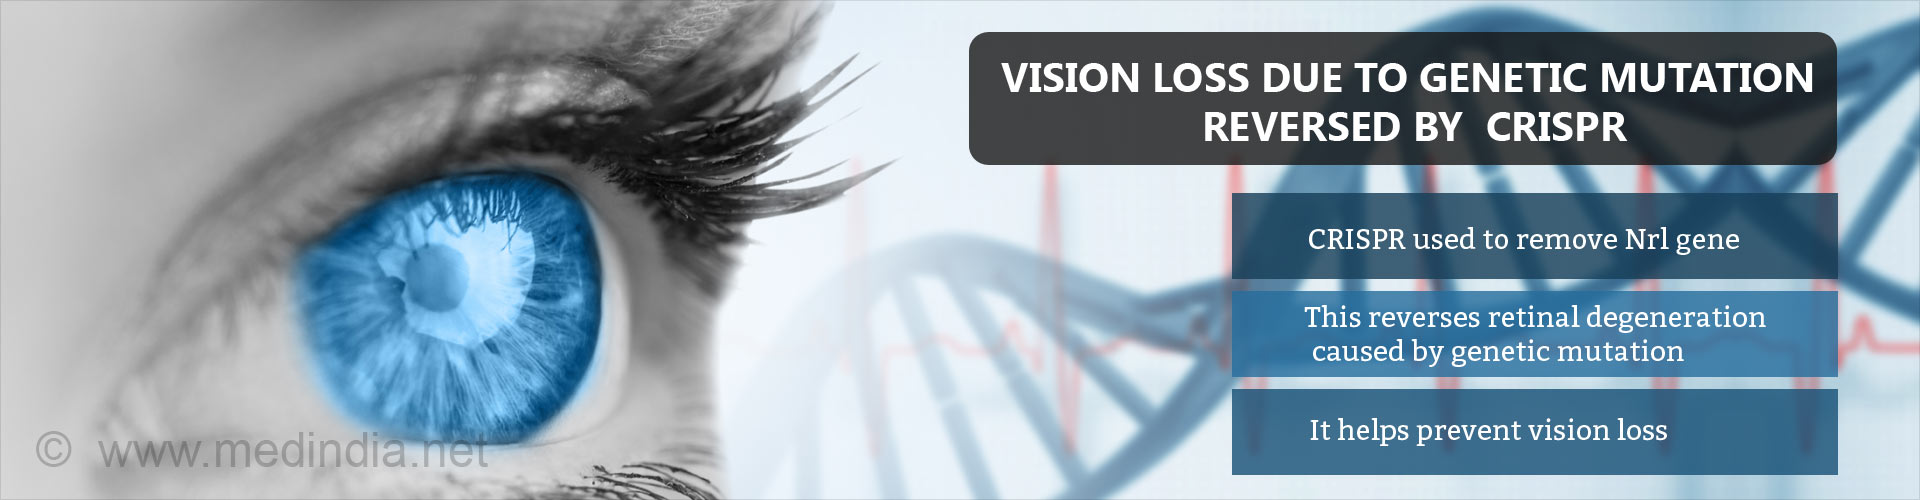 Crispr Used To Modify Vision Loss Caused By Genetic Mutation